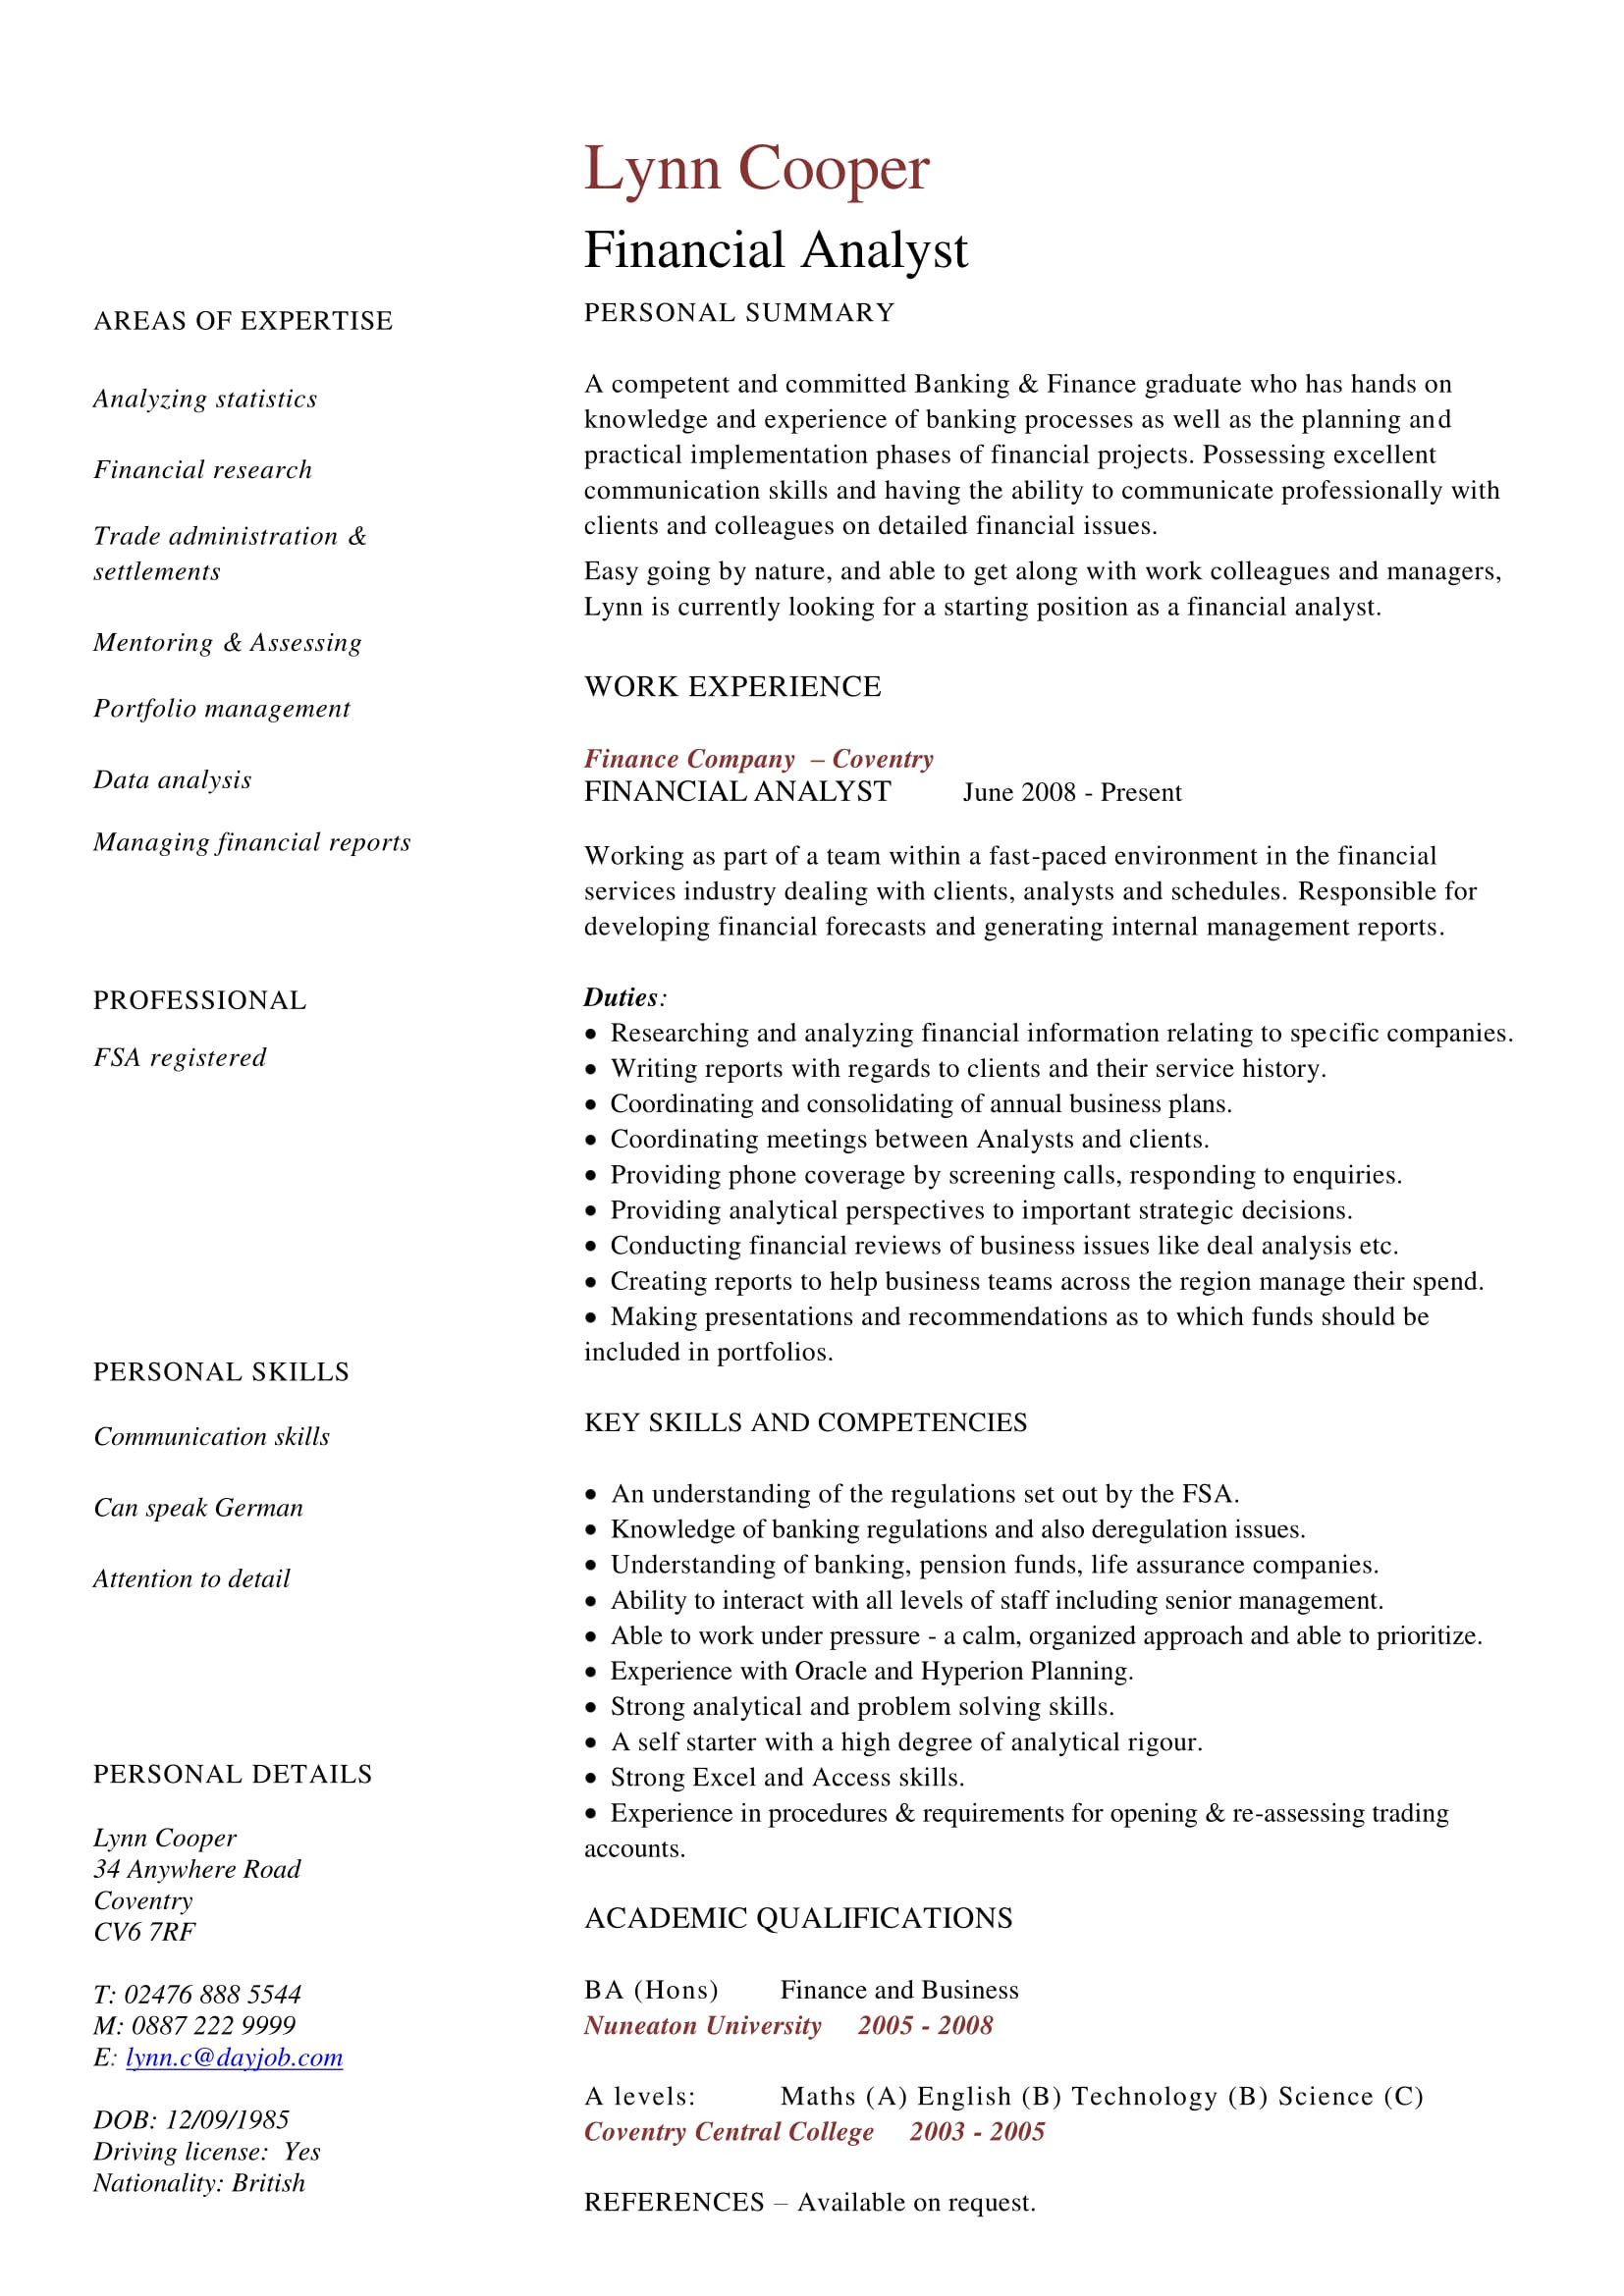 Sample Resume for Banking and Finance Graduate 24 Best Finance Resume Sample Templates – Wisestep